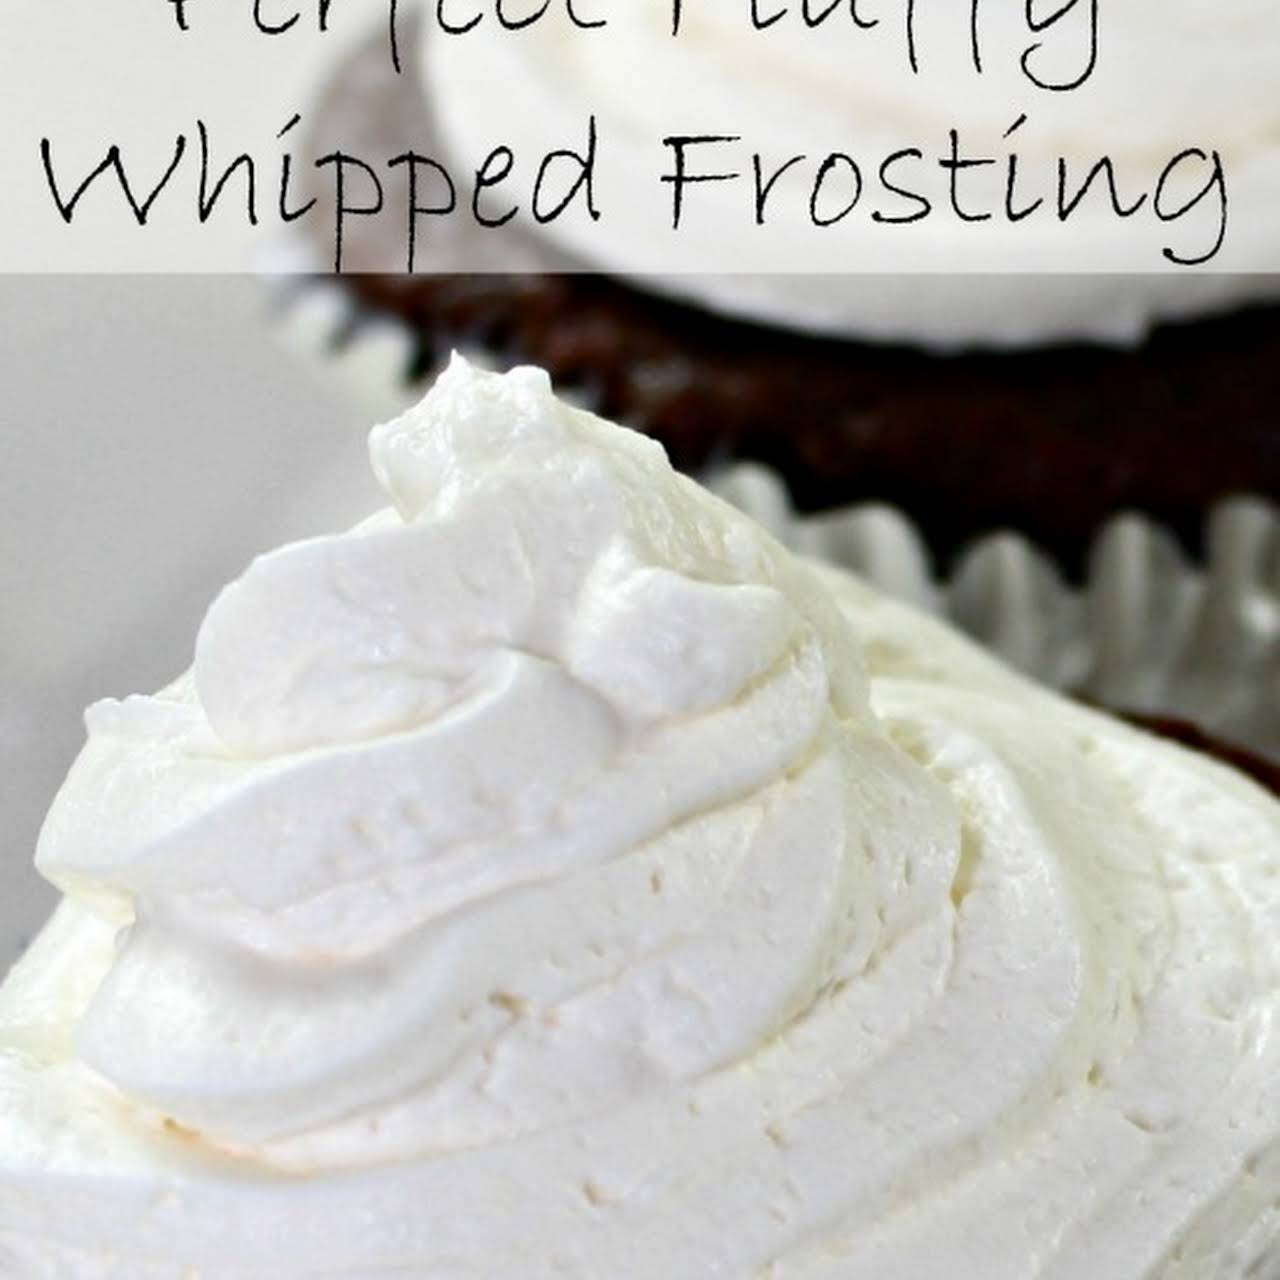 10 Best Heavy Whipping Cream Frosting Recipes | Yummly